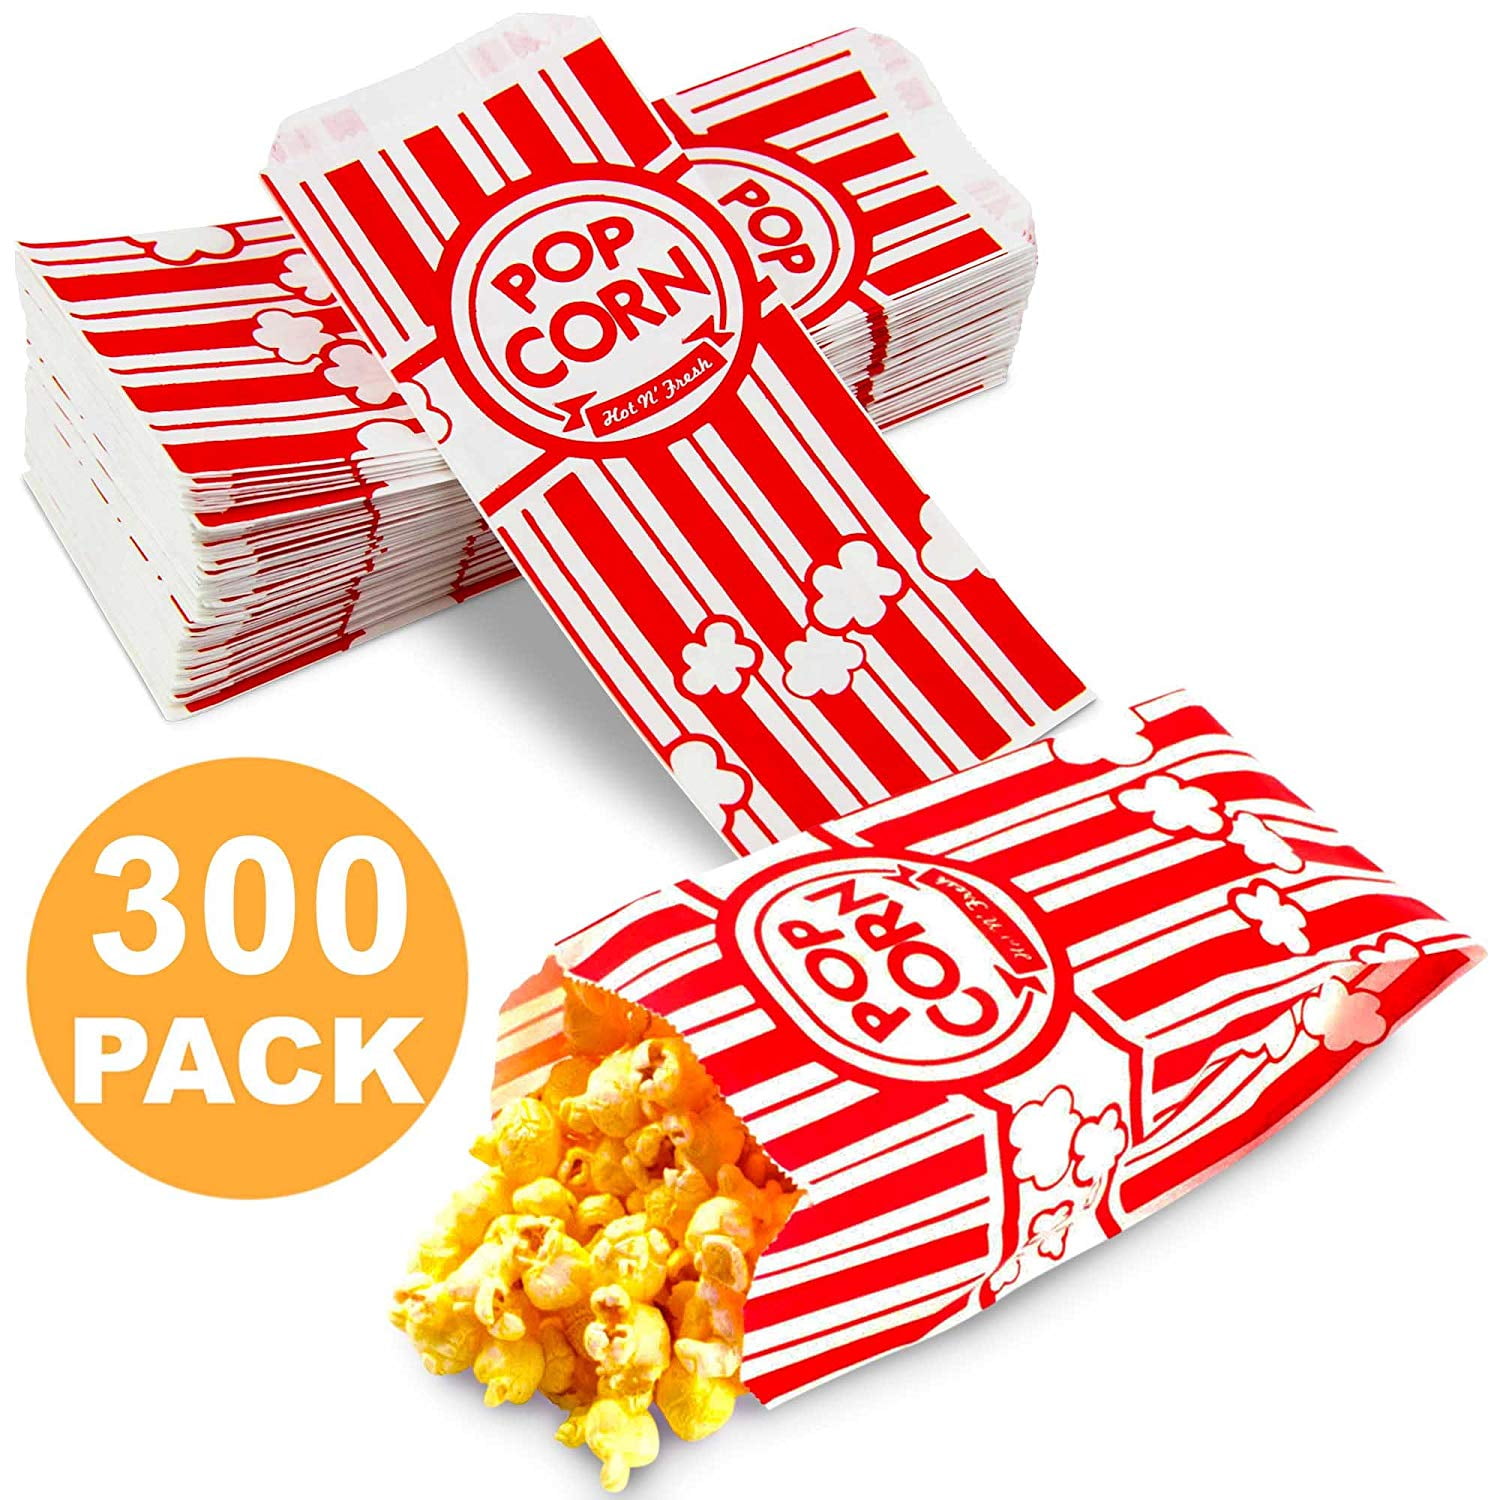 Pack of 100 Paper Popcorn Bags 1 oz and Home Movie Nights. Birthday Parties Snack Bars for Concession Stands Movie Theaters 